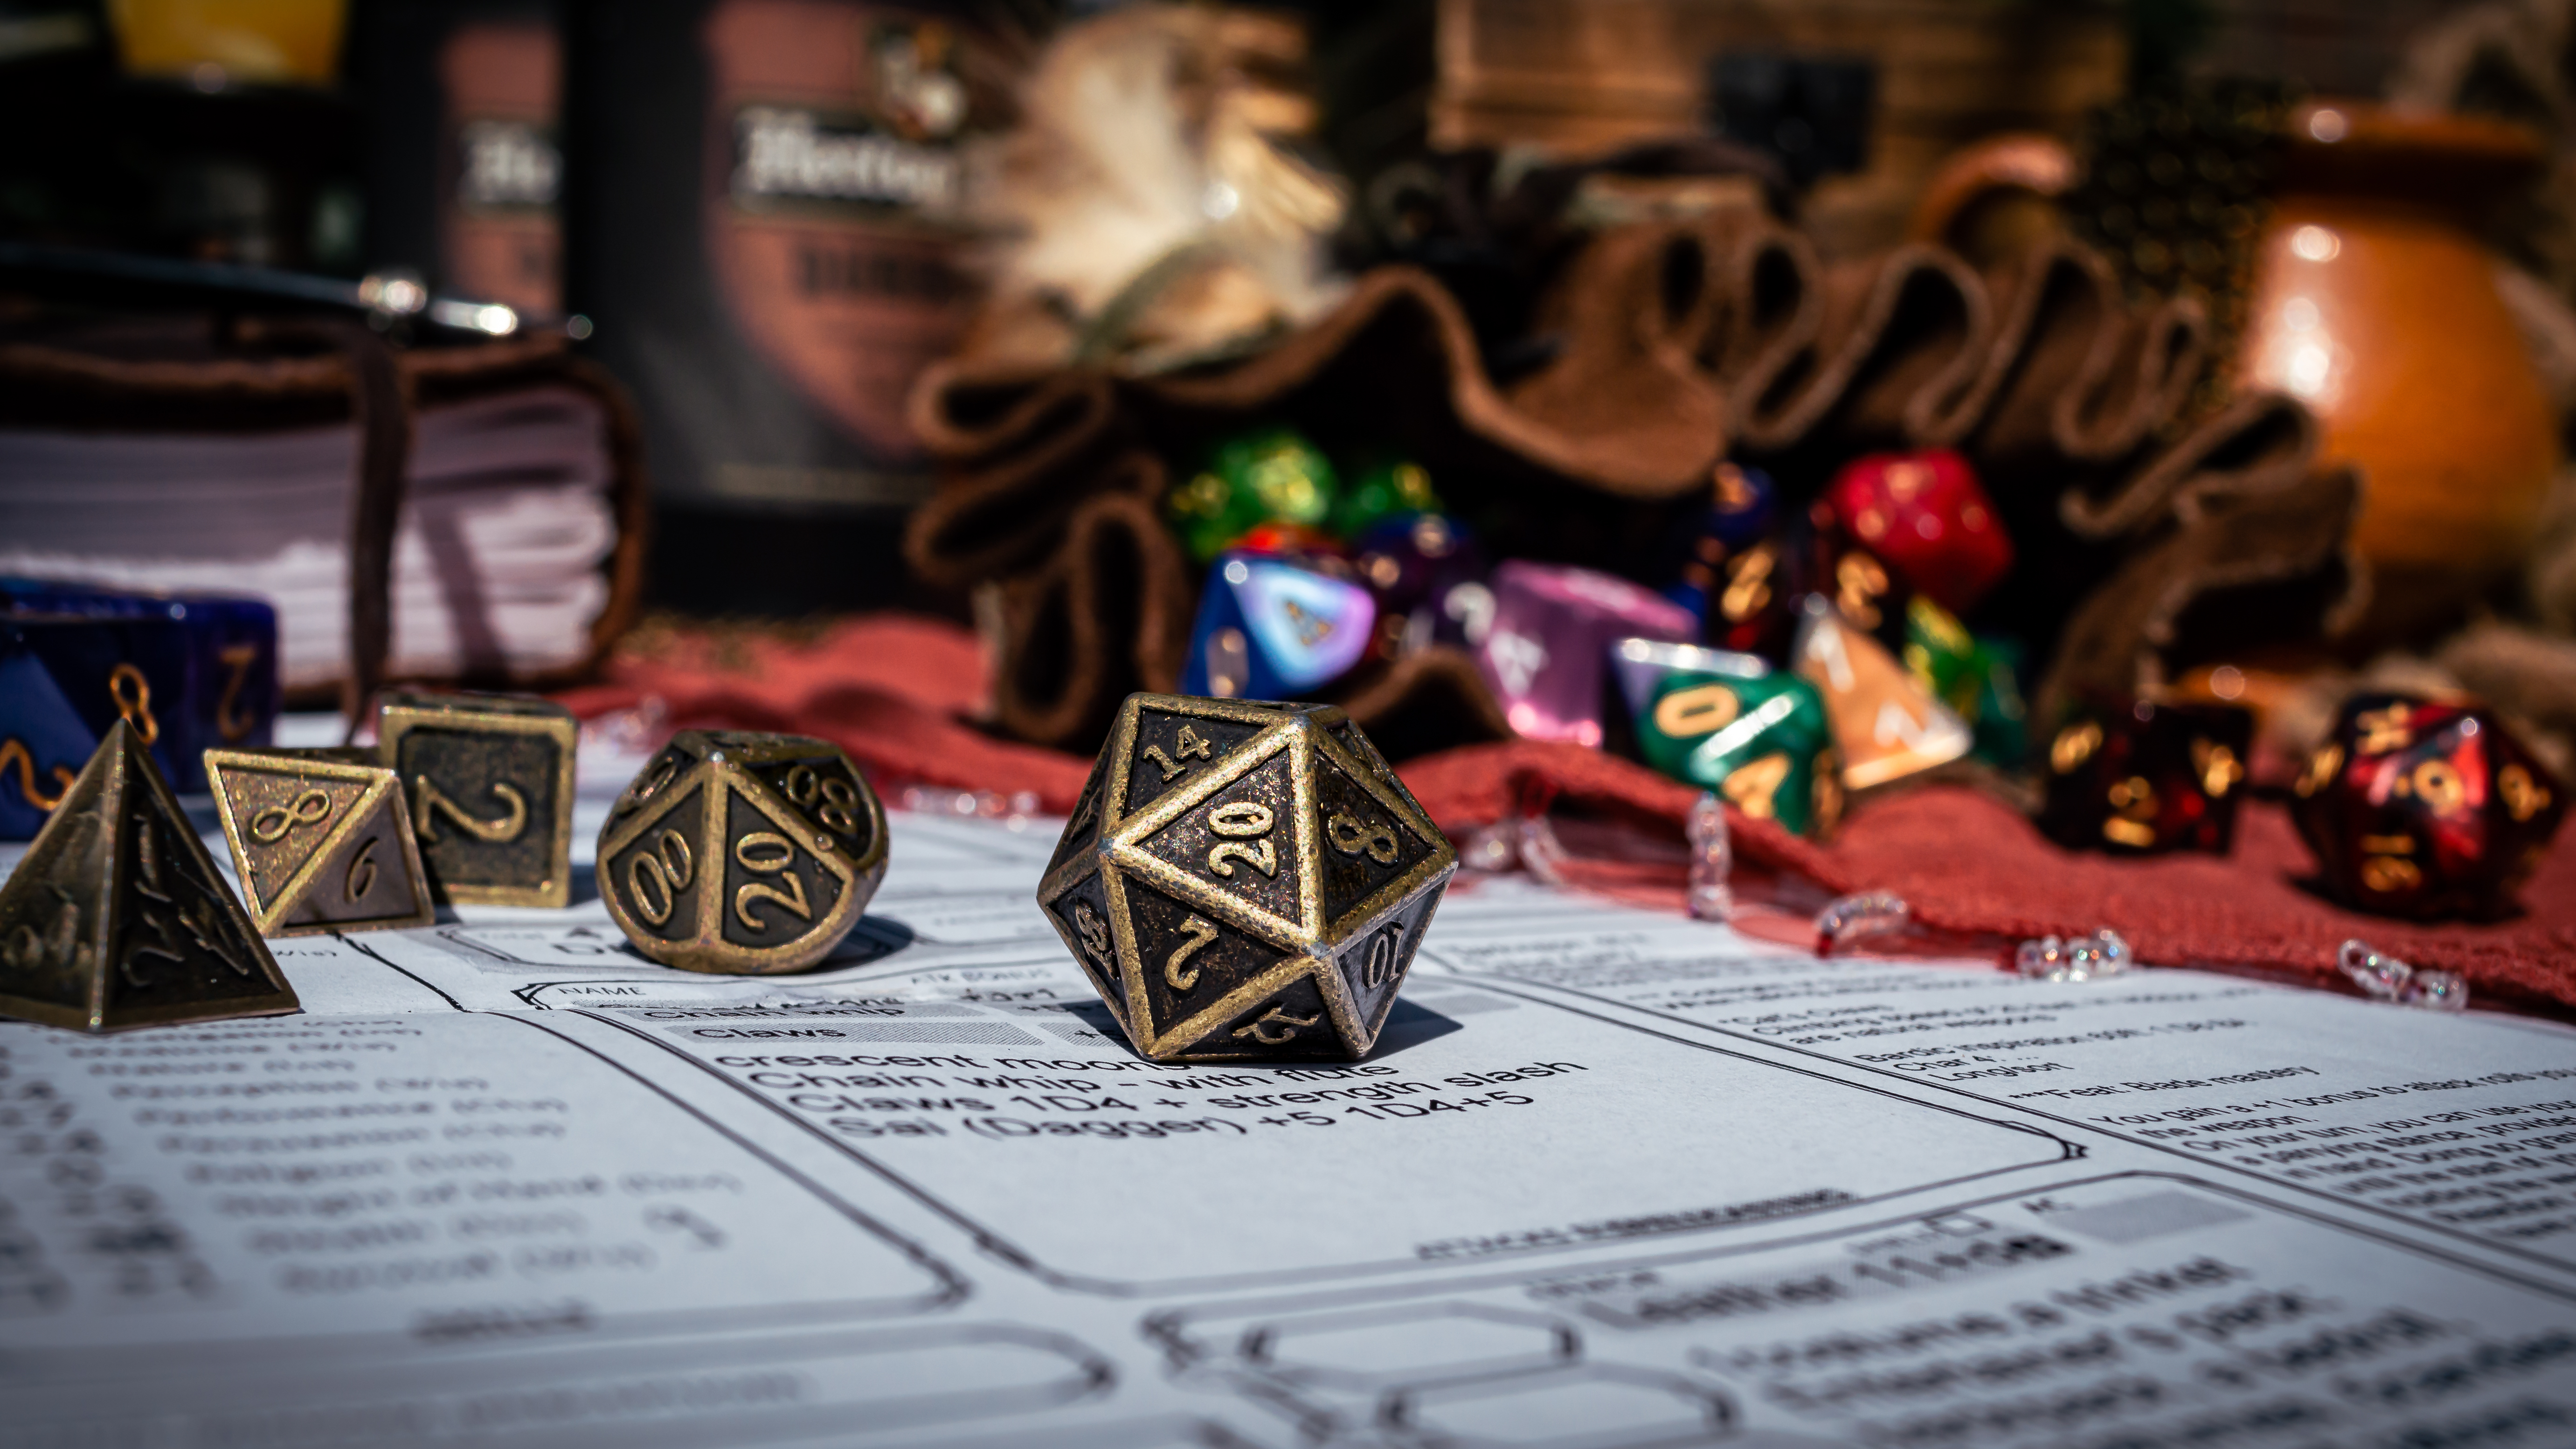 Dungeons and Dragons game with dice and character sheets